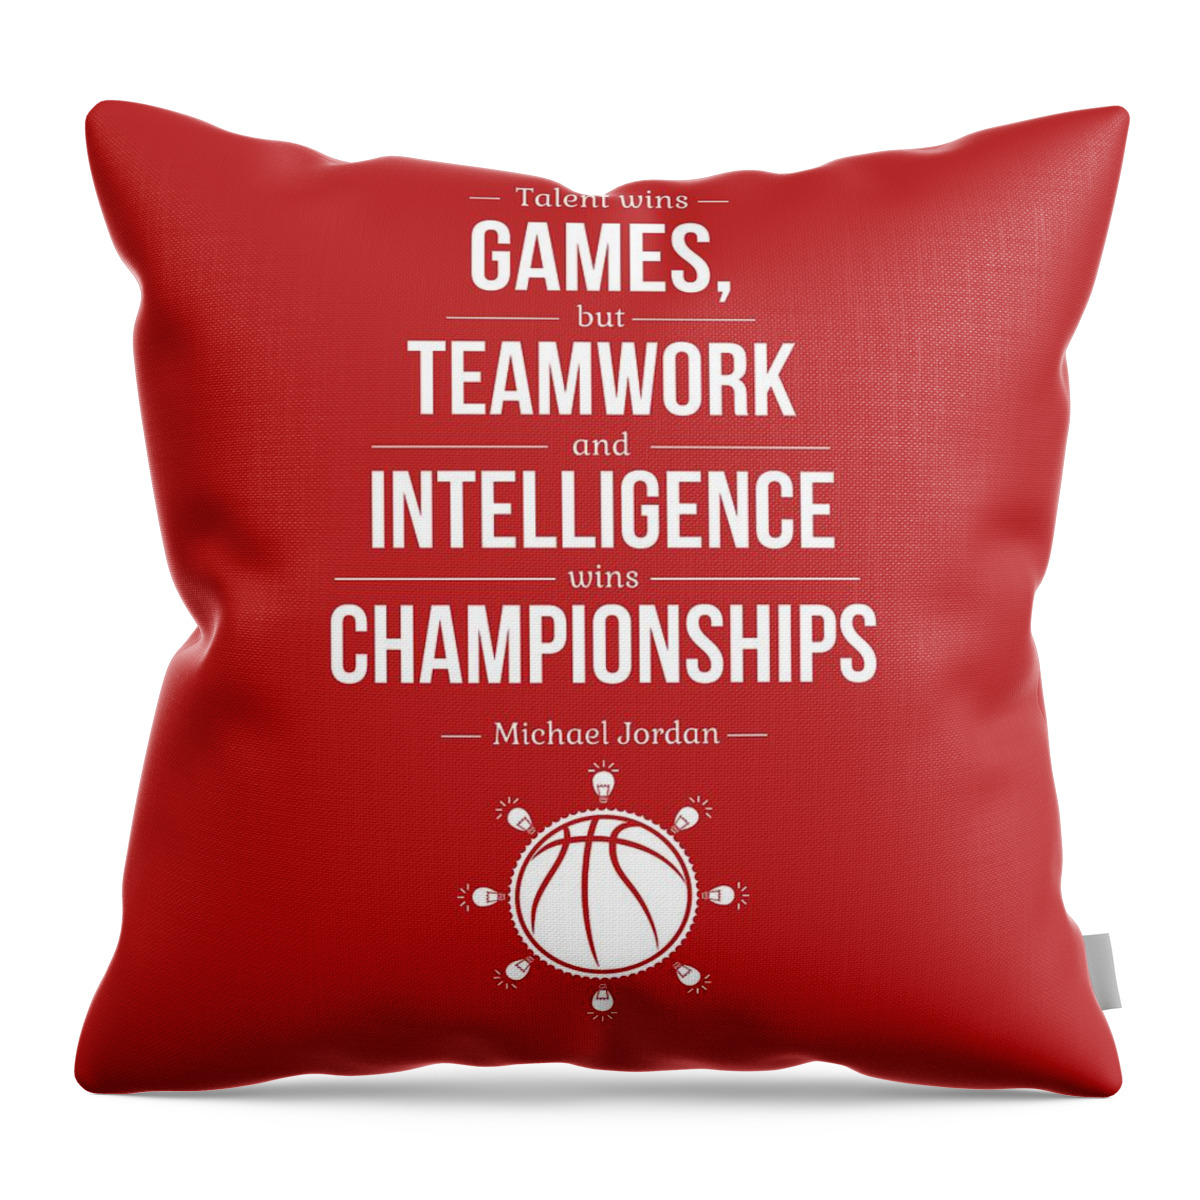 Motivational Throw Pillow featuring the digital art Michael Jordan Quotes poster by Lab No 4 - The Quotography Department